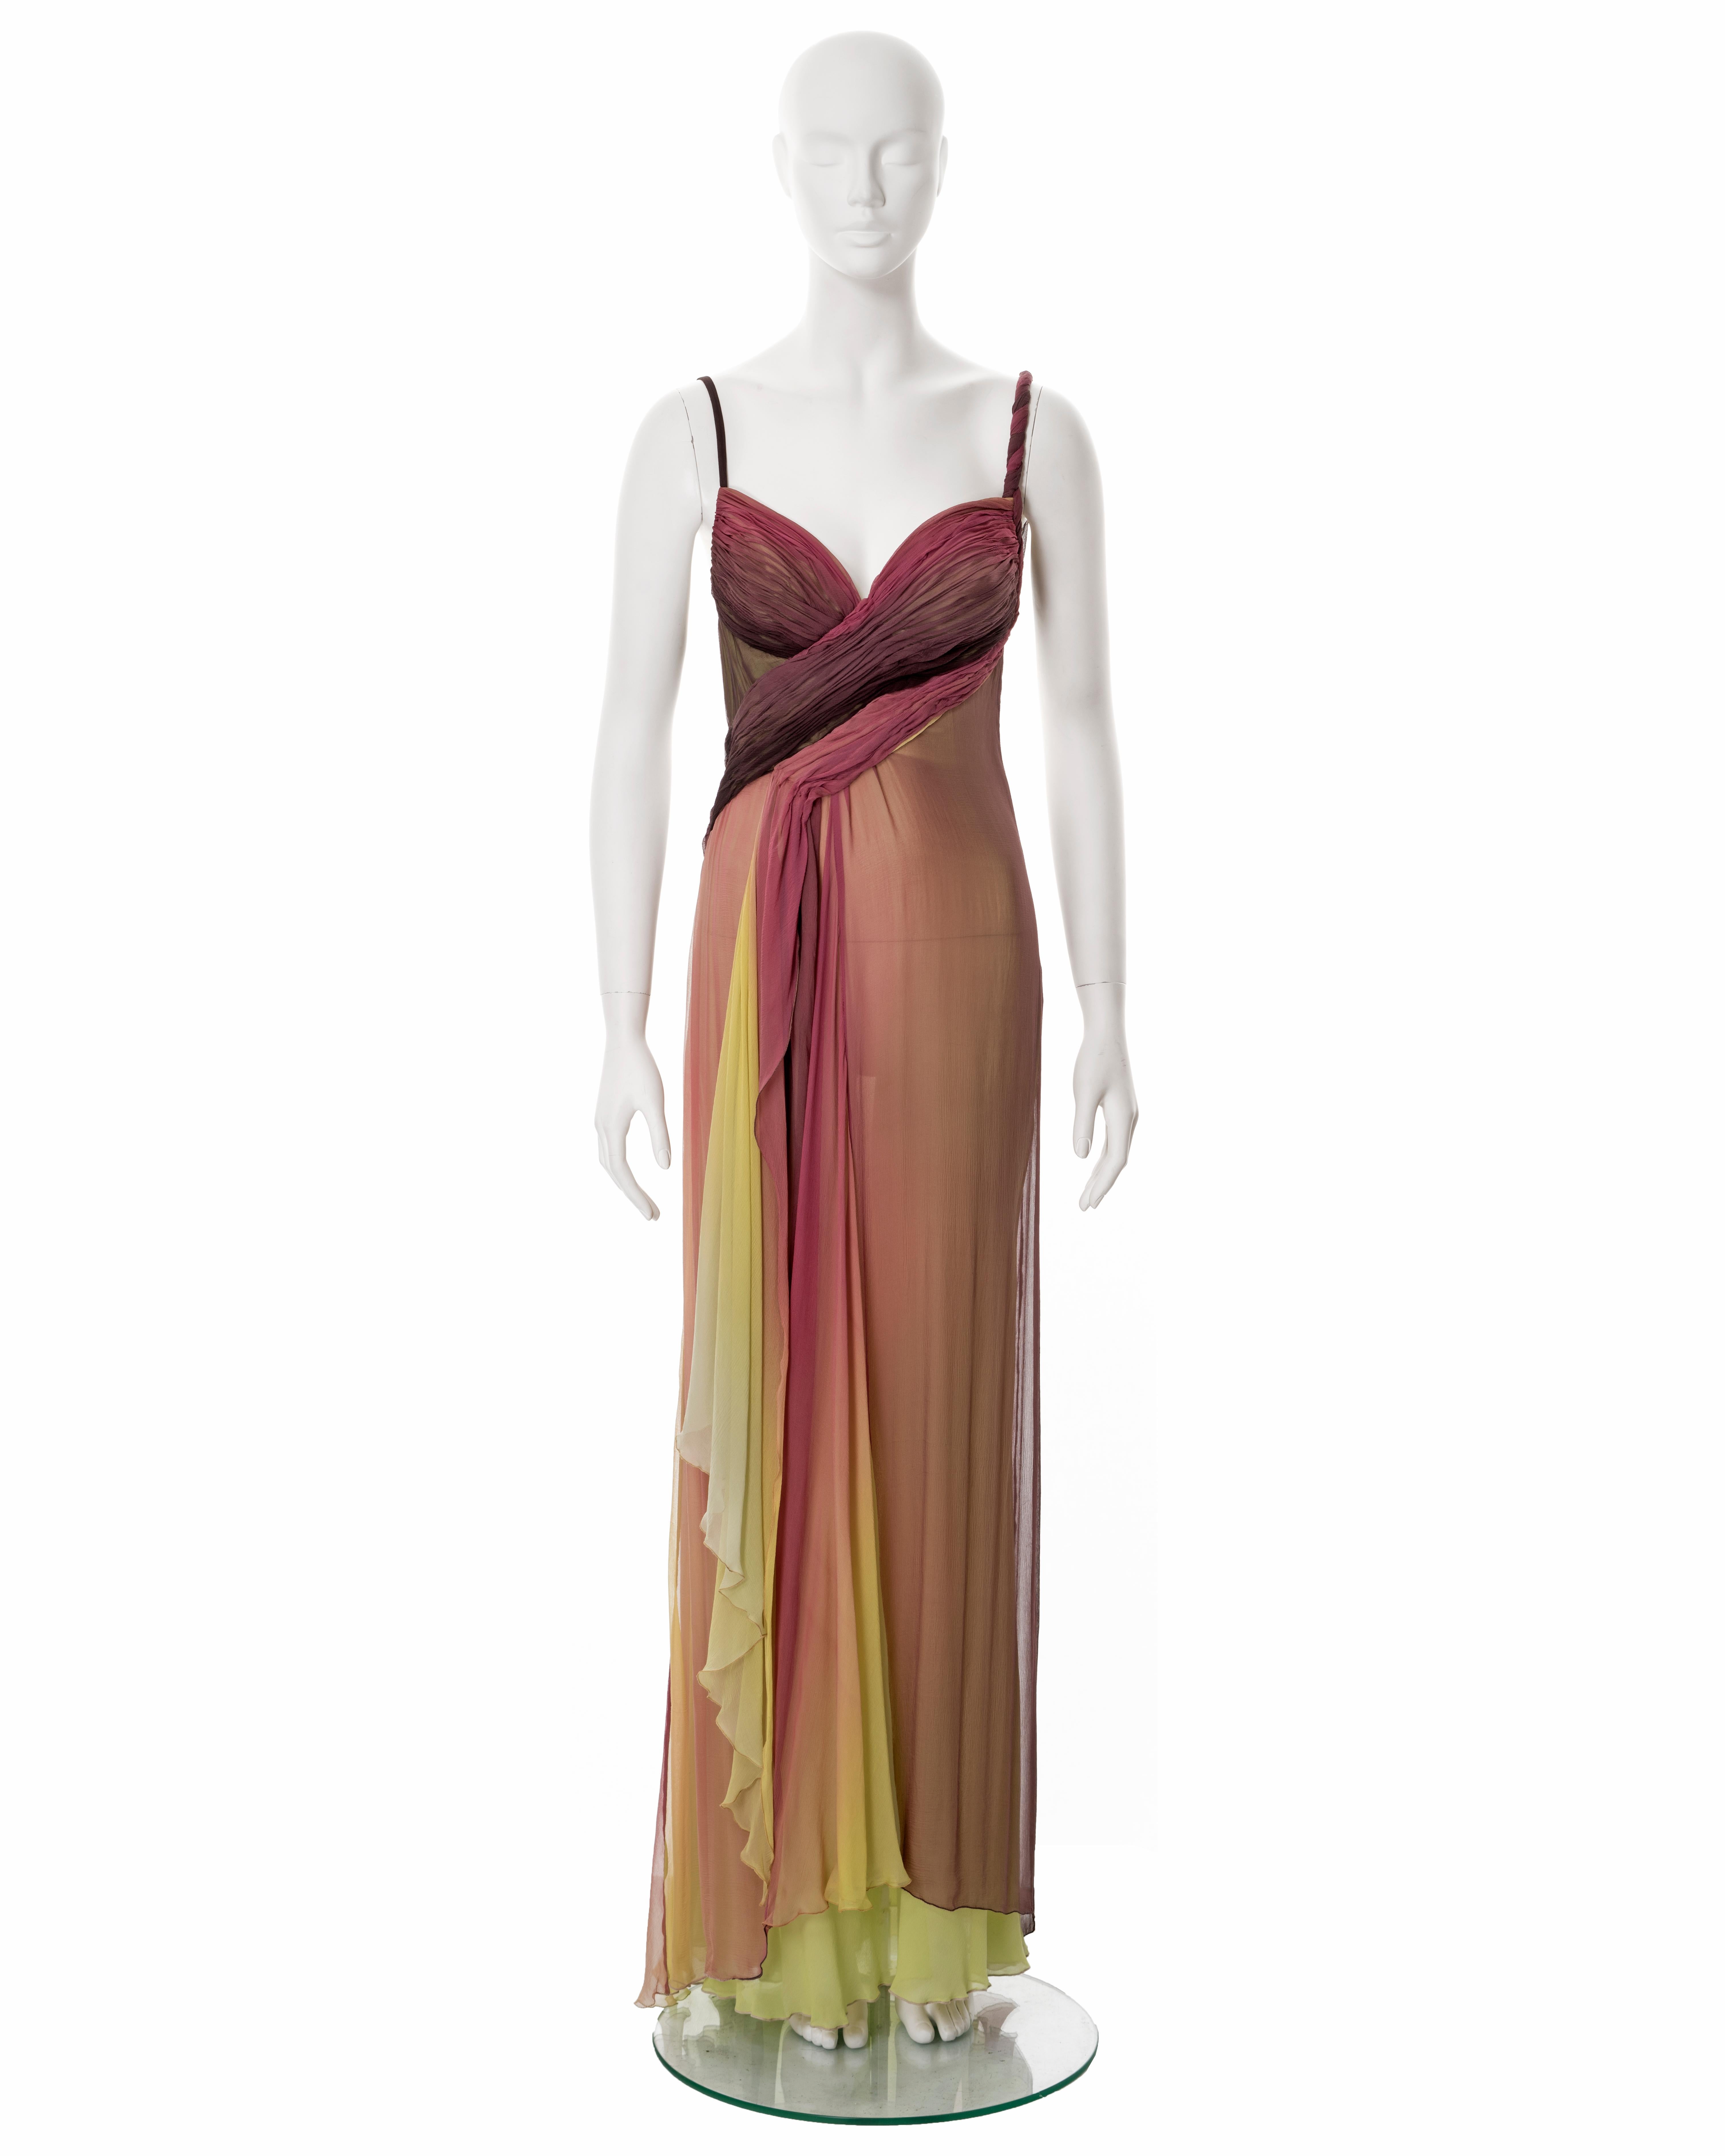 ▪ Versace evening dress
▪ Creative Director: Donatella Versace
▪ Sold by One of a Kind Archive 
▪ Spring-Summer 2006
▪ Constructed from ombré silk chiffon in a shades of plum and chartreuse 
▪ Finely pleated bodice 
▪ Hand-rolled shoulder straps
▪